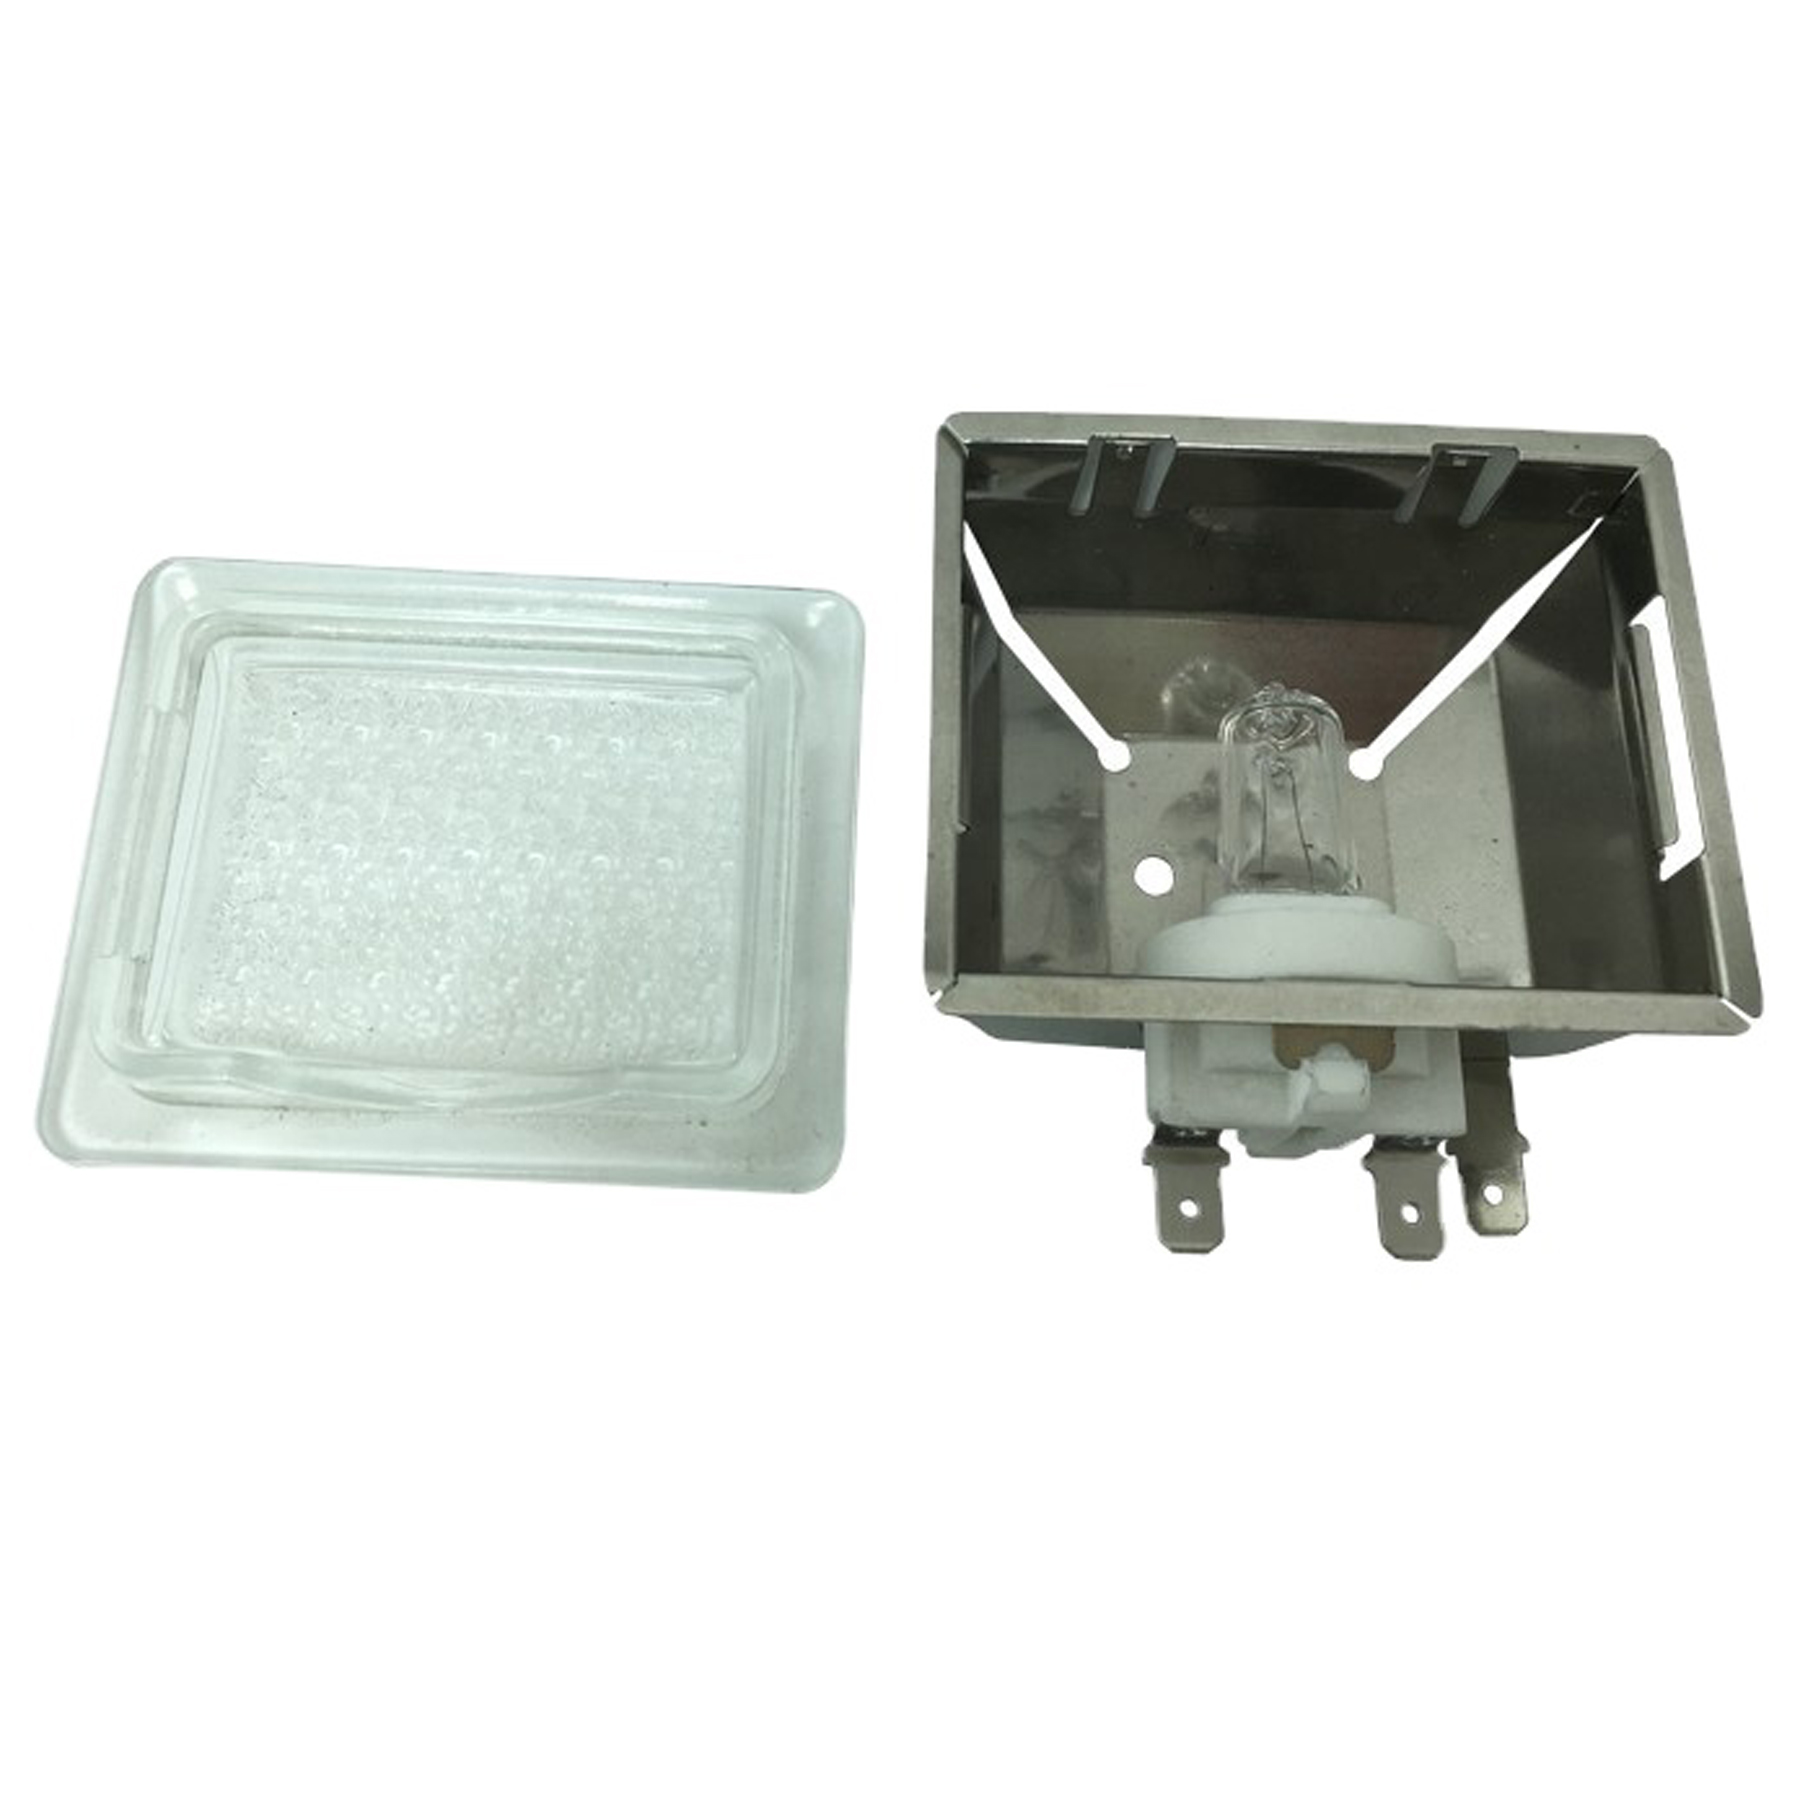 E14 G9 Oven Lamp Holder Electrical Oven Parts